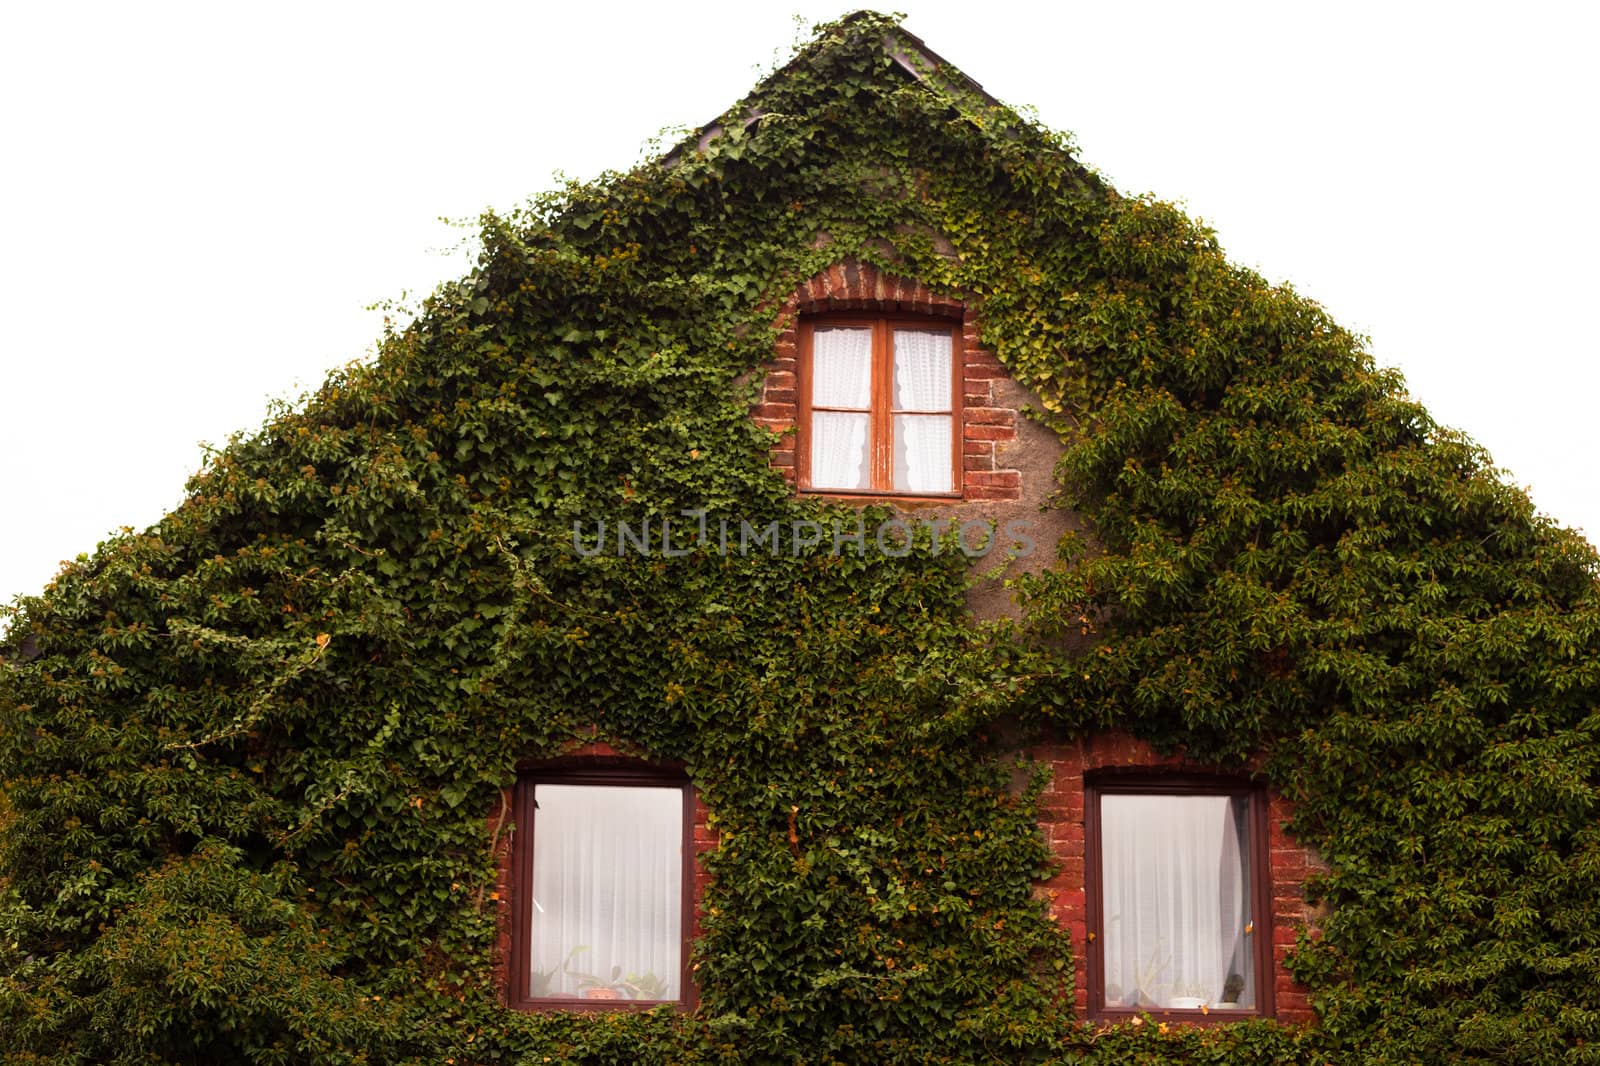 Common ivy covers gable wall by PiLens